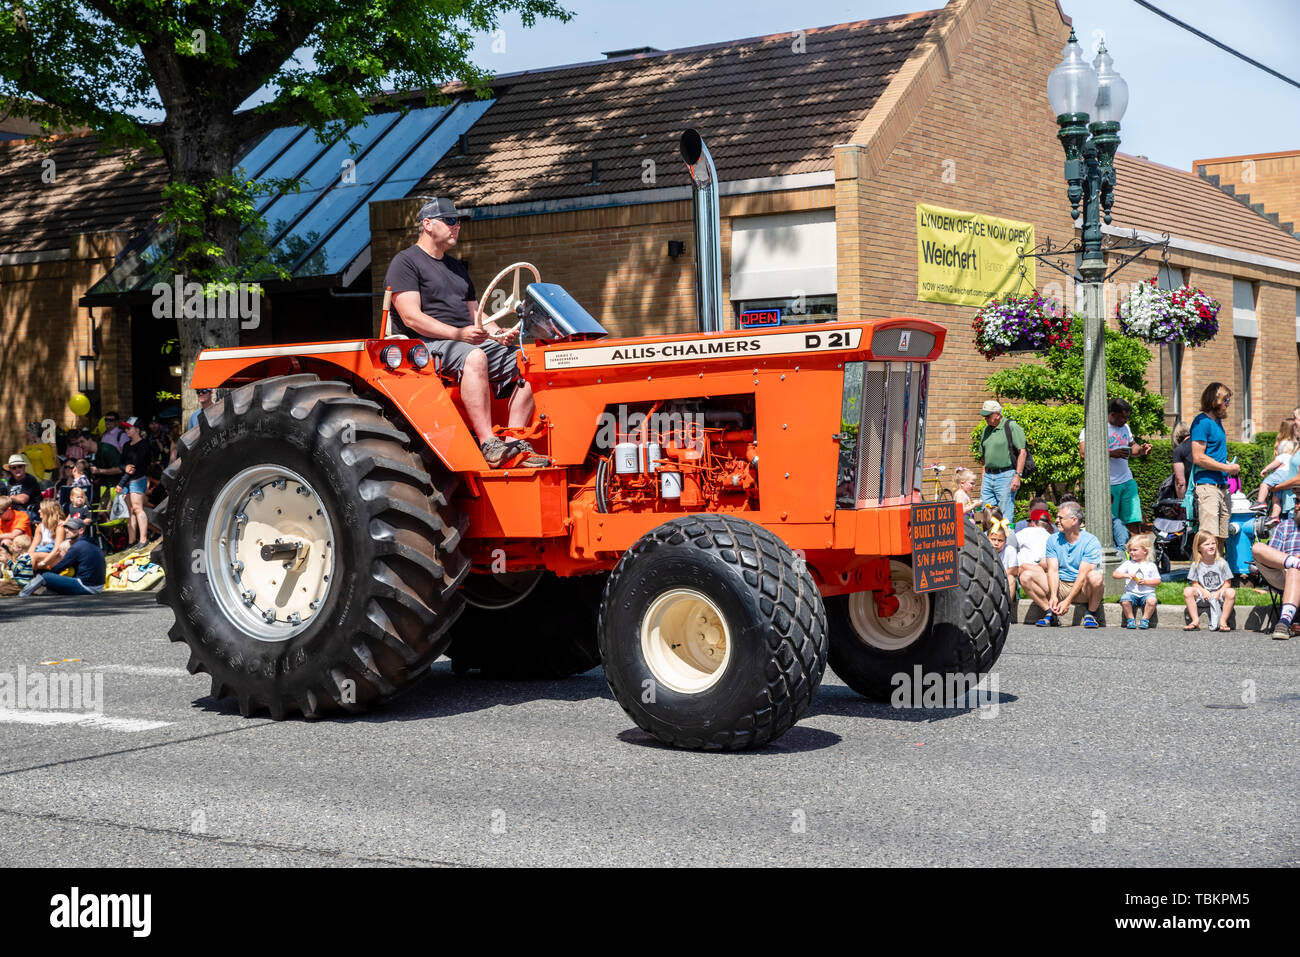 Allis-Chalmers D 21 tractor in the 2019 Lynden Farmers Day Parade.  Lynden, Washington Stock Photo